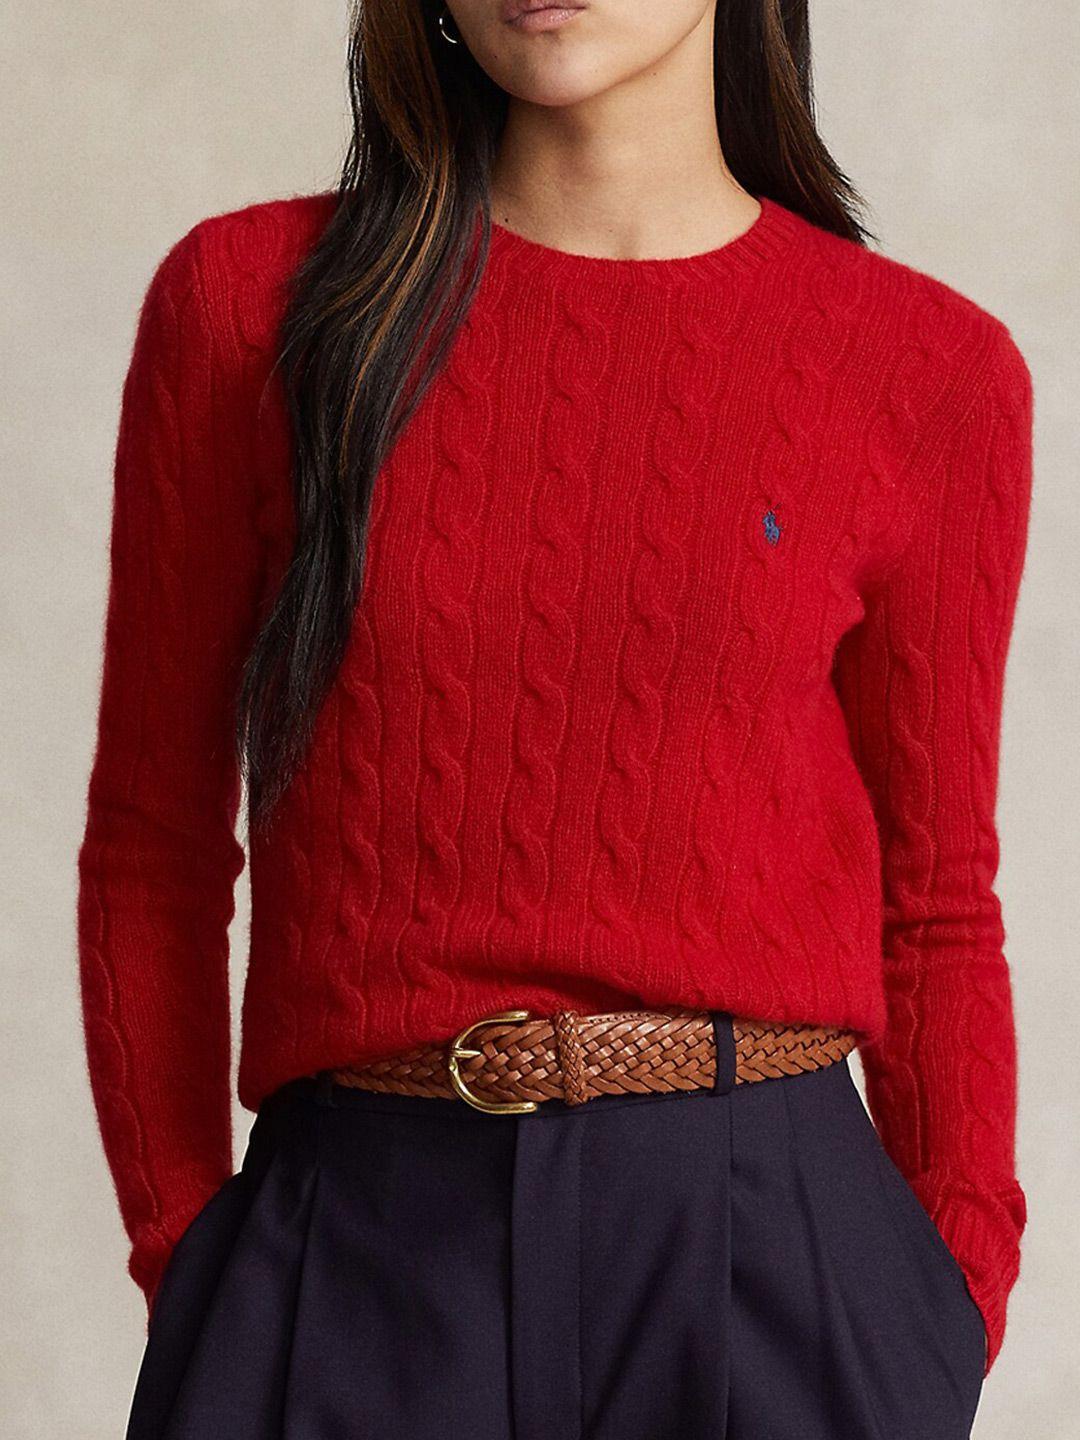 polo-ralph-lauren-cable-knit-round-neck-sweaters